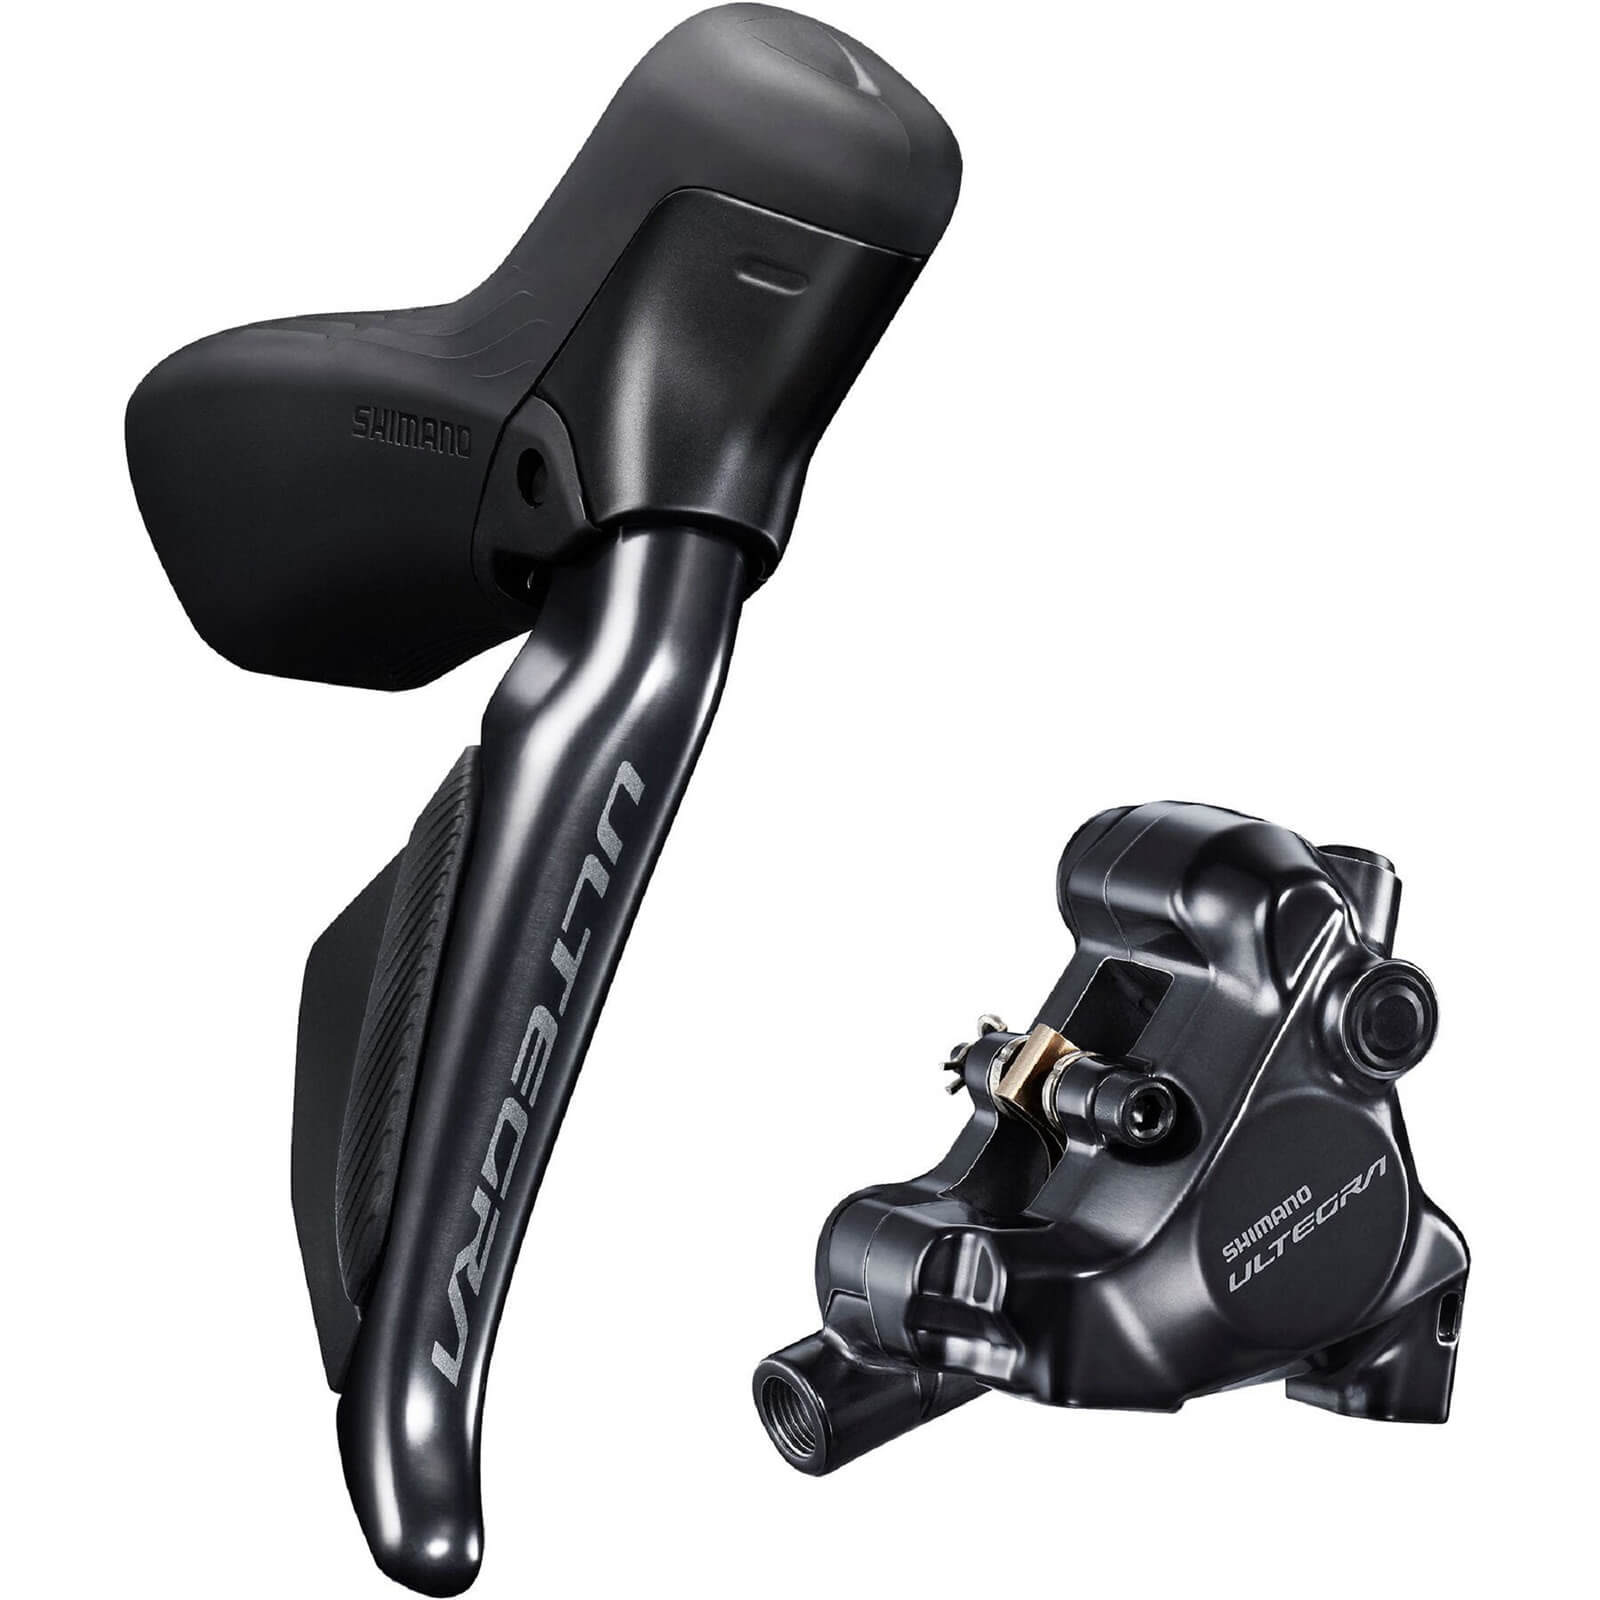 Shimano Ultegra ST-R8170 Hydraulic Disc Brake STI Lever with Flat Mount Caliper - Right/Front